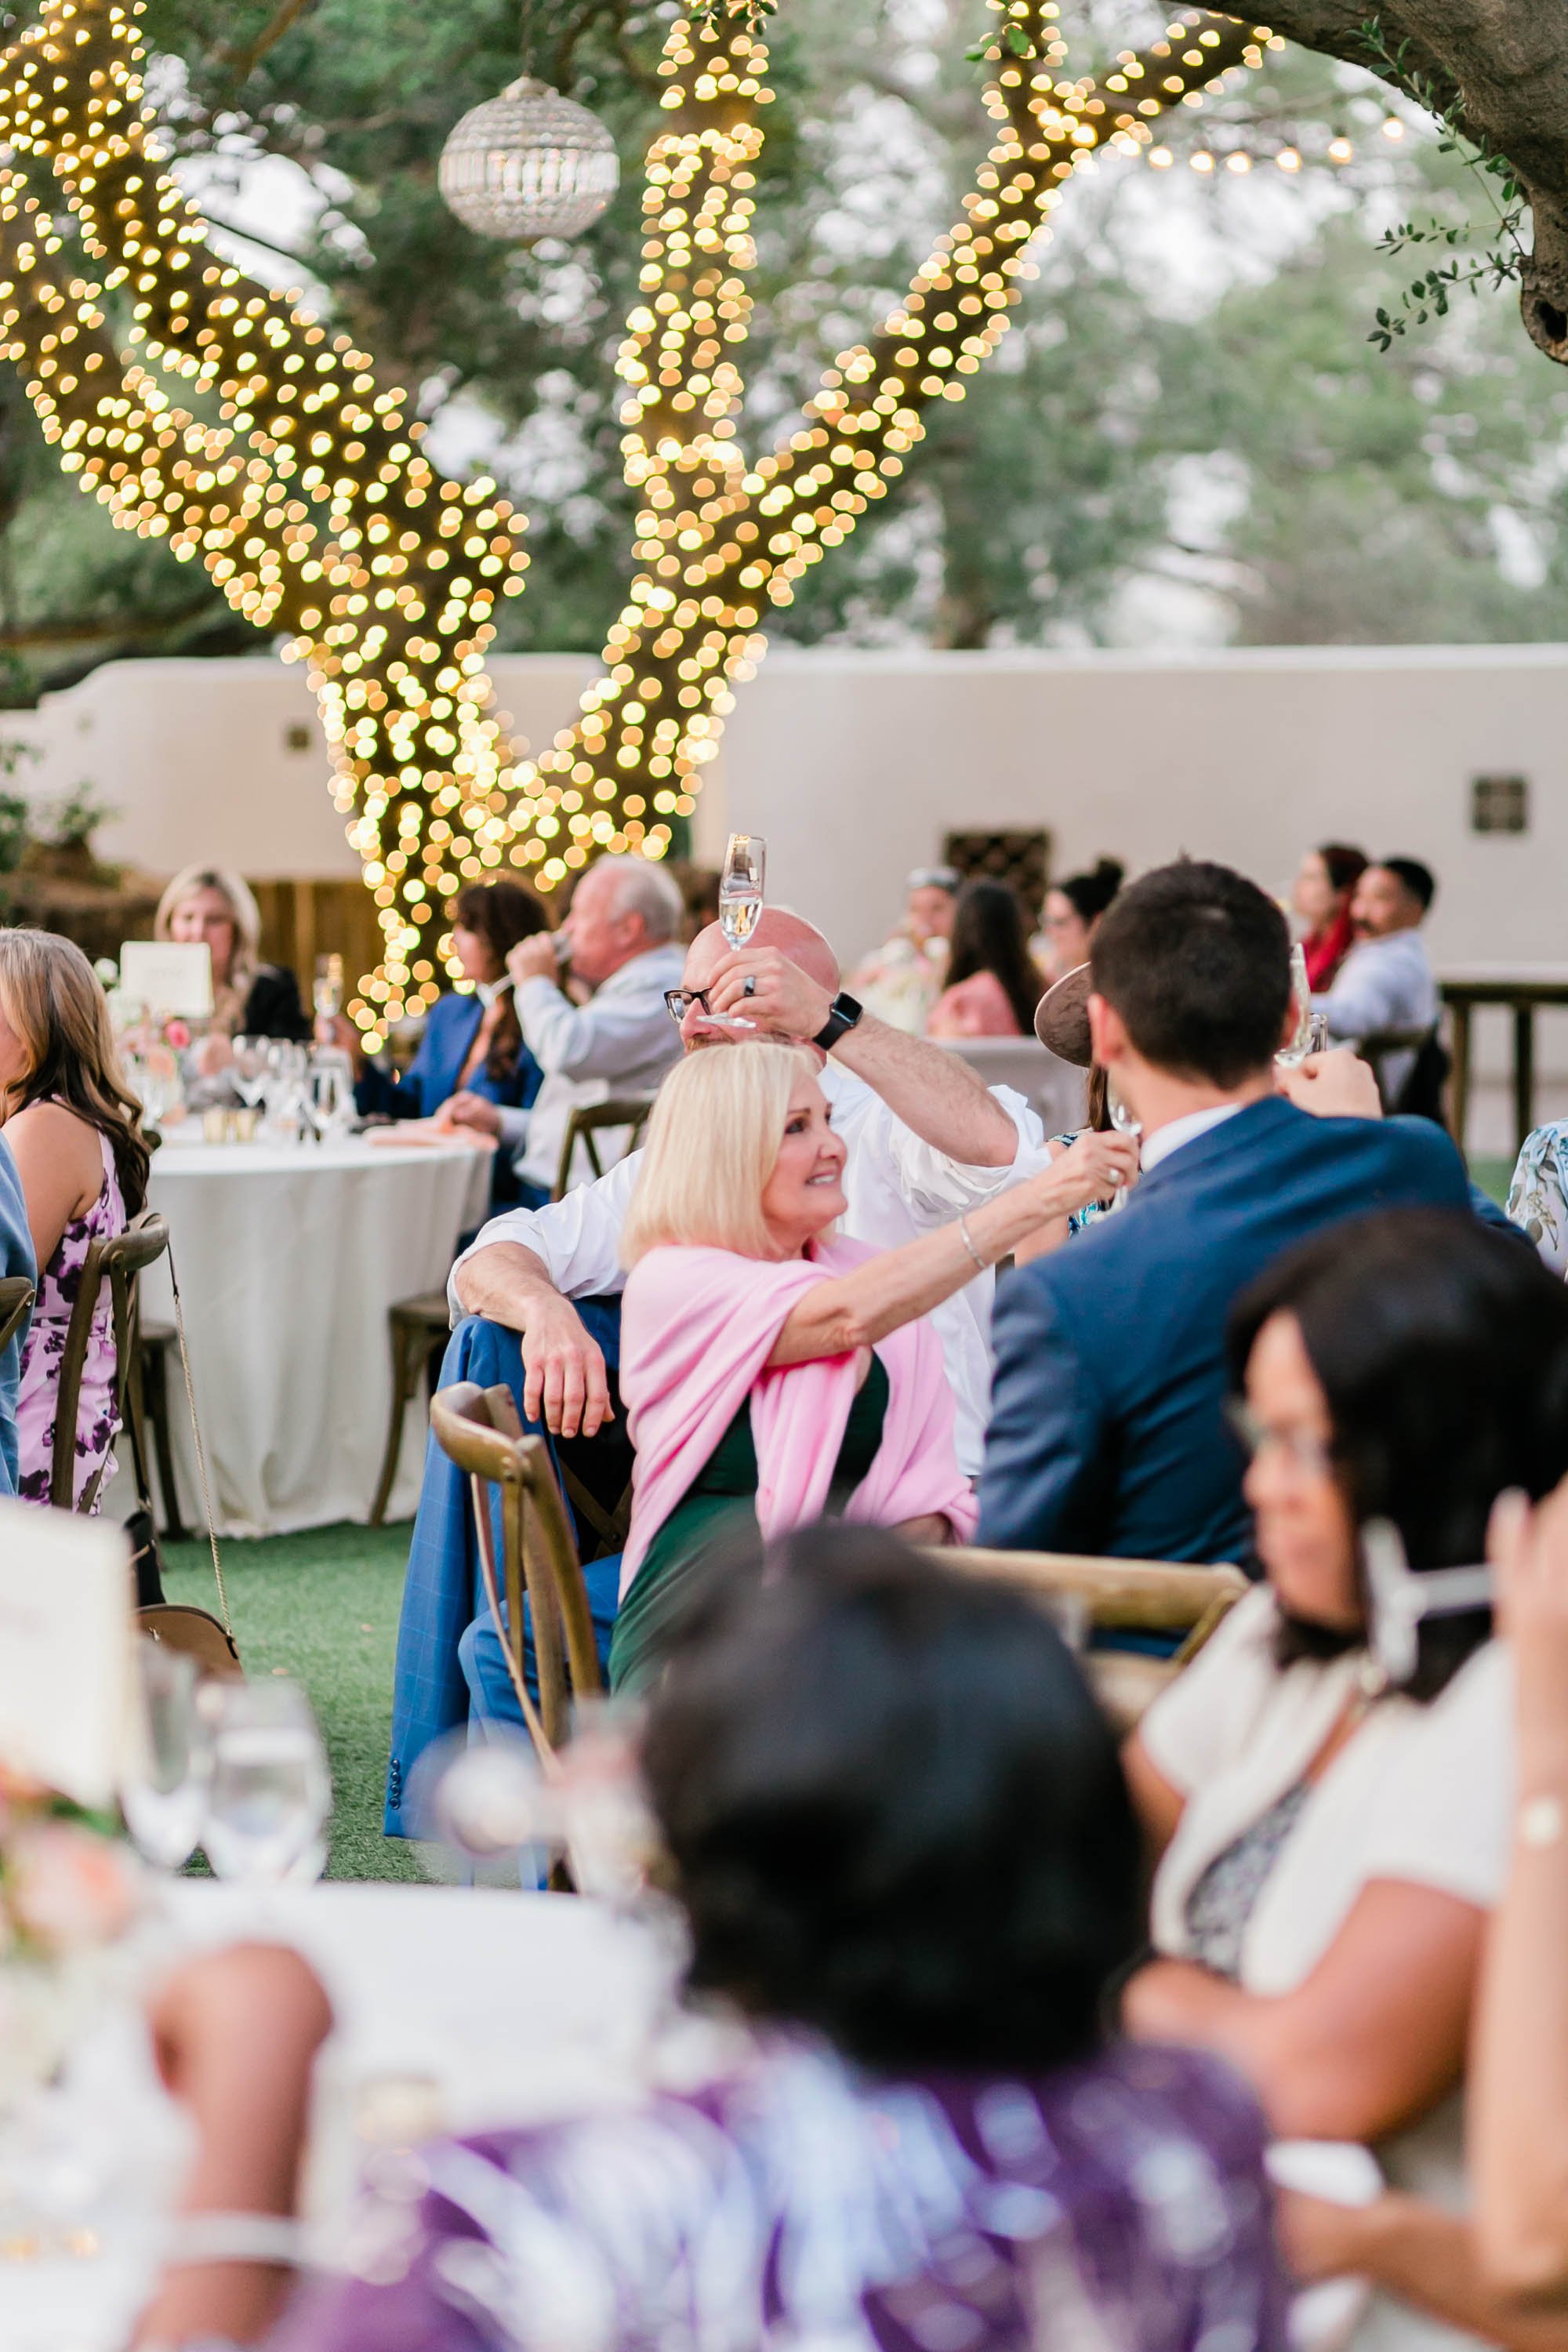 Outdoor reception at Spanish style ranch house, Quail Ranch events, wedding venue in Ventura county